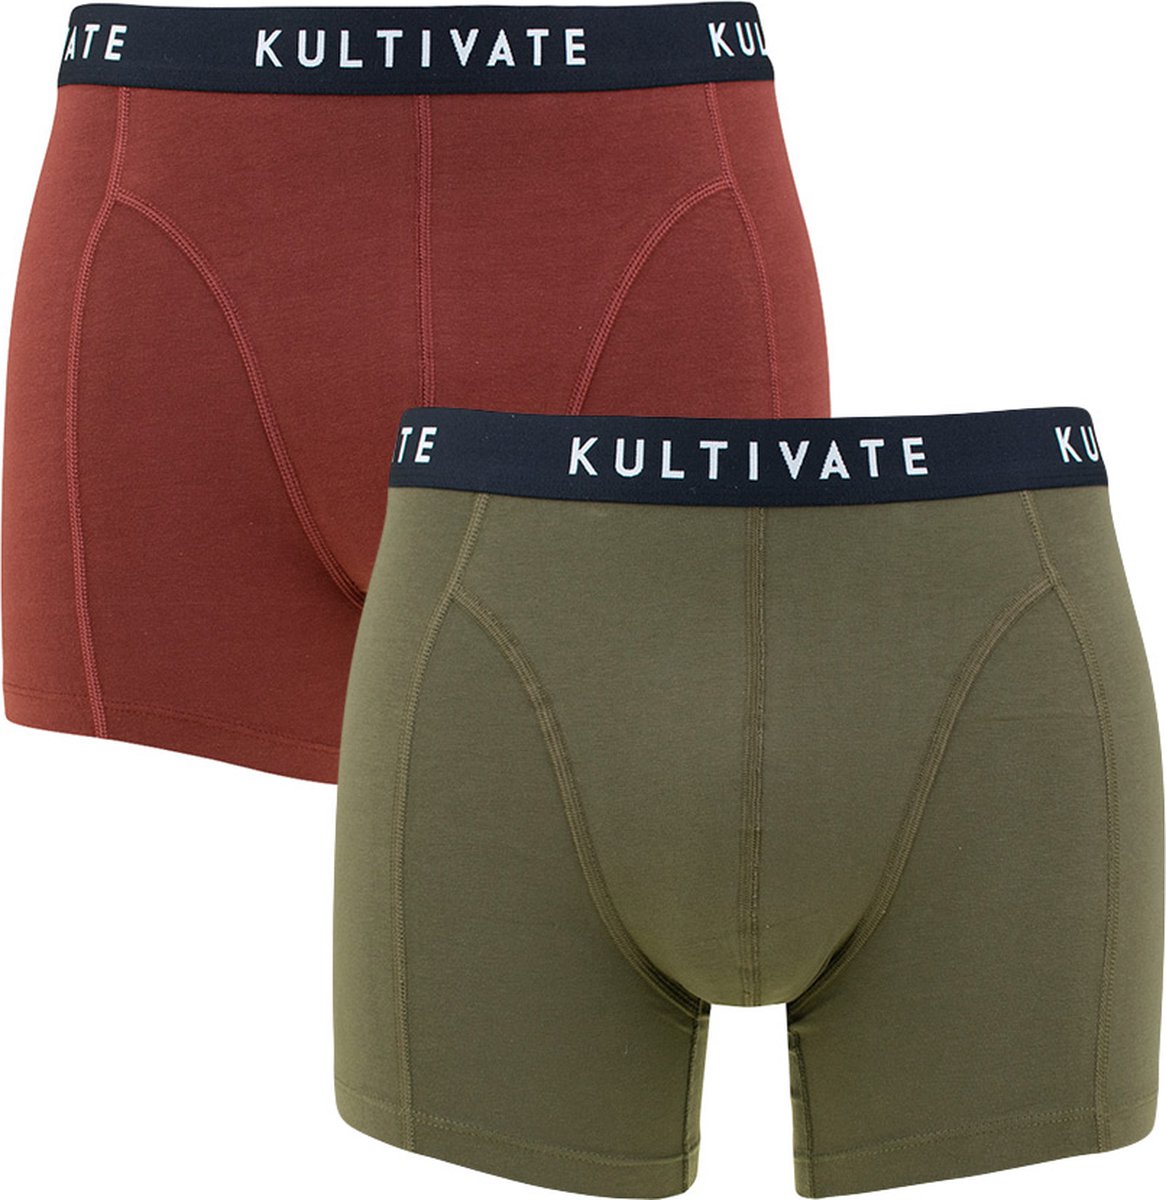 Kultivate 2P boxers basic groen & rood - XL